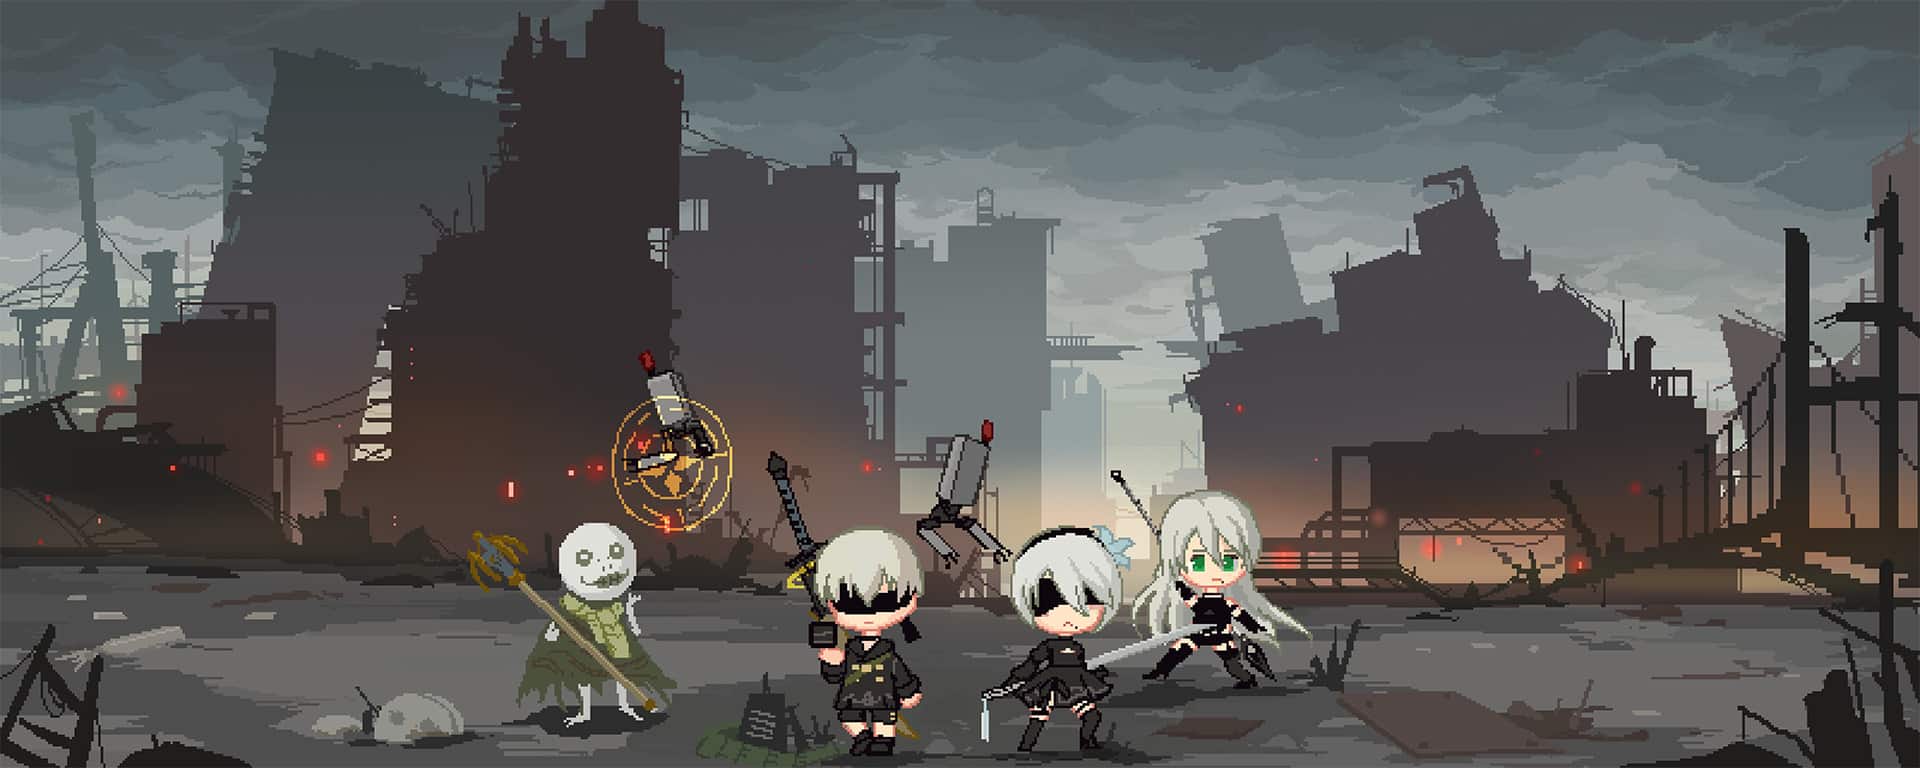 NieR:Automata The End Of YoRHa Edition Shares 4 New Commemorative Launch  Illustrations - Noisy Pixel